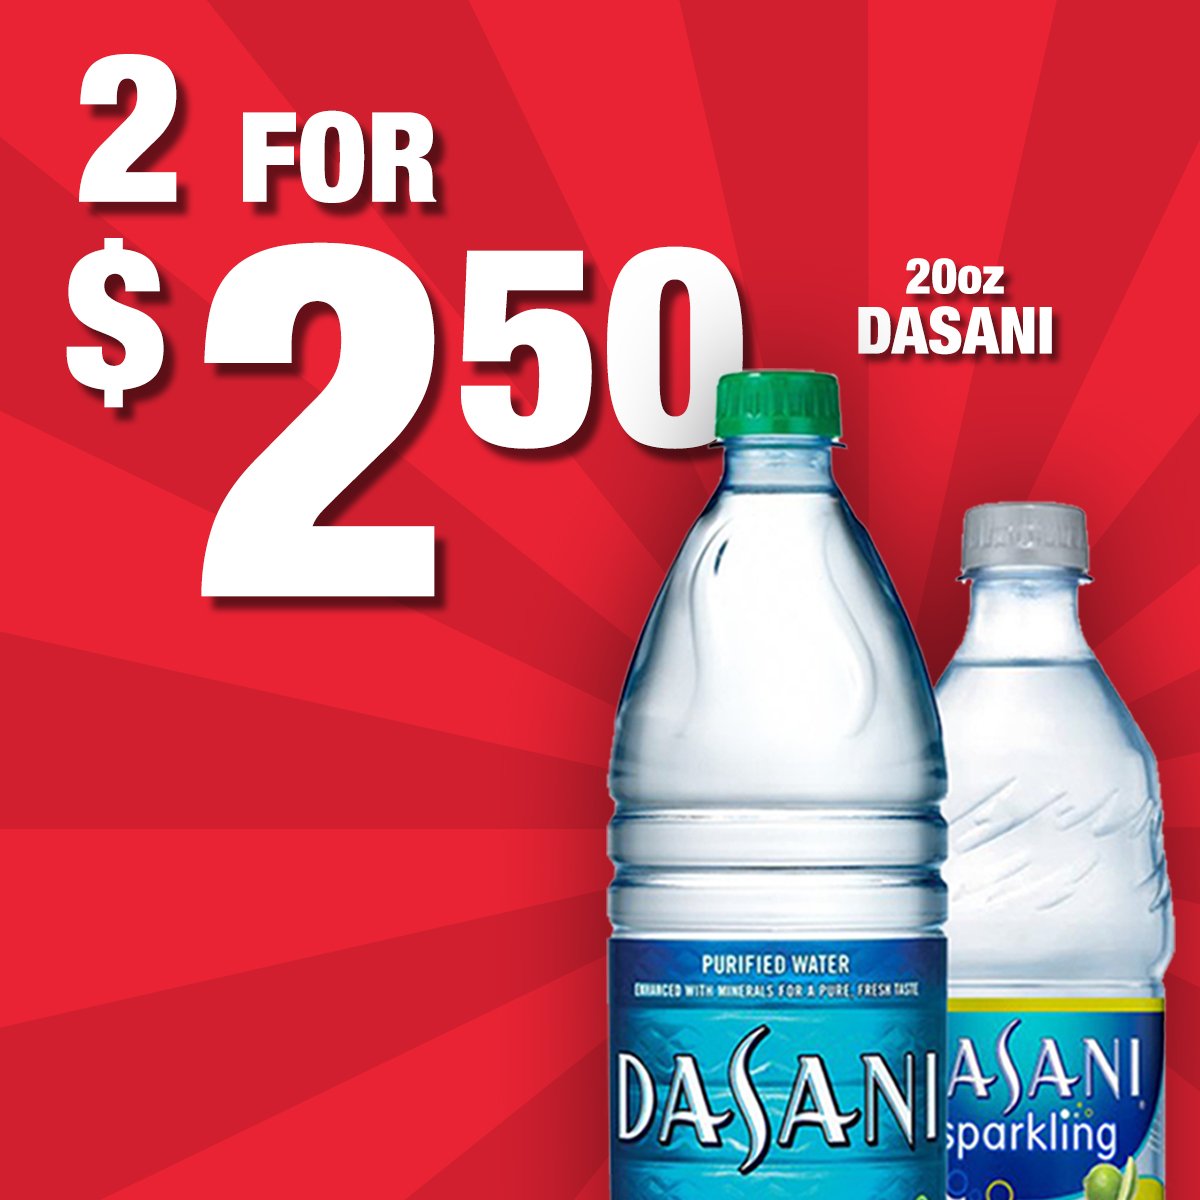 Golden Pantry For A Limited Time We Have 2 For 2 50 Dasani Water Visit Your Local Golden Pantry For This Deal Eatdrinkandbegolden Dasani T Co 4aja3eiolc